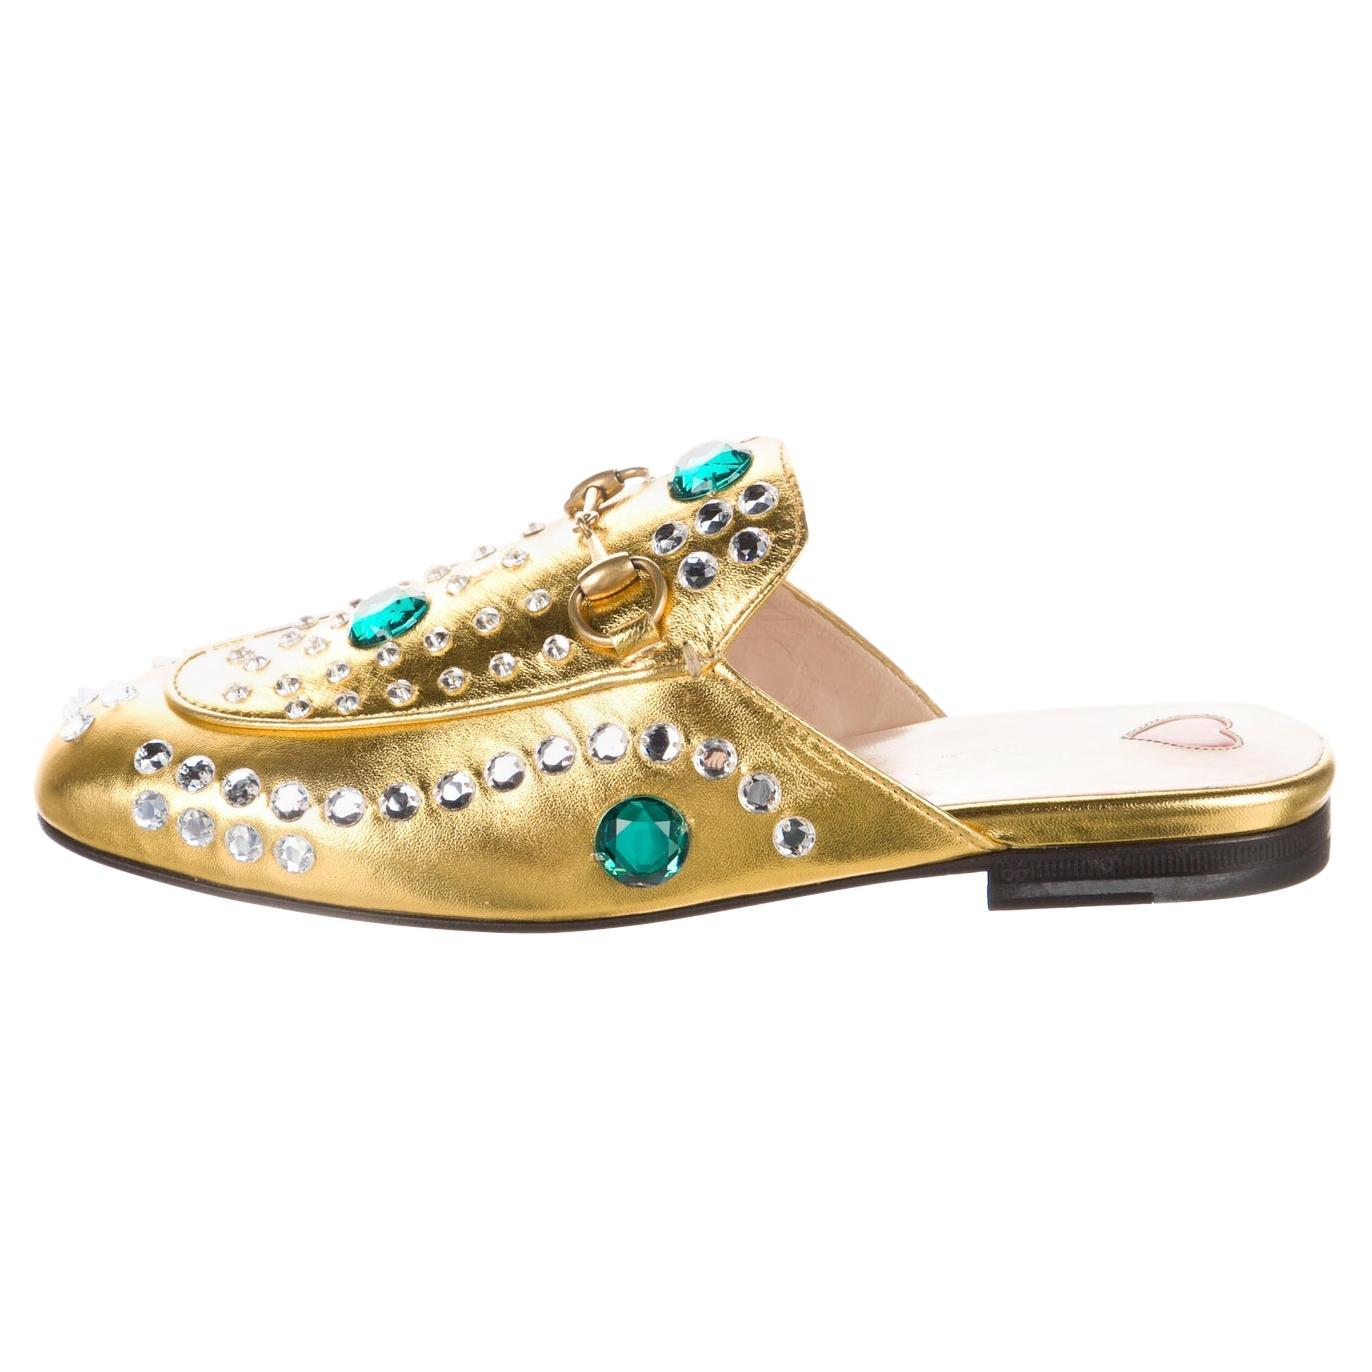 New Gucci Disco Princetown Gold Jeweled Loafers Slides Flats Sz 36